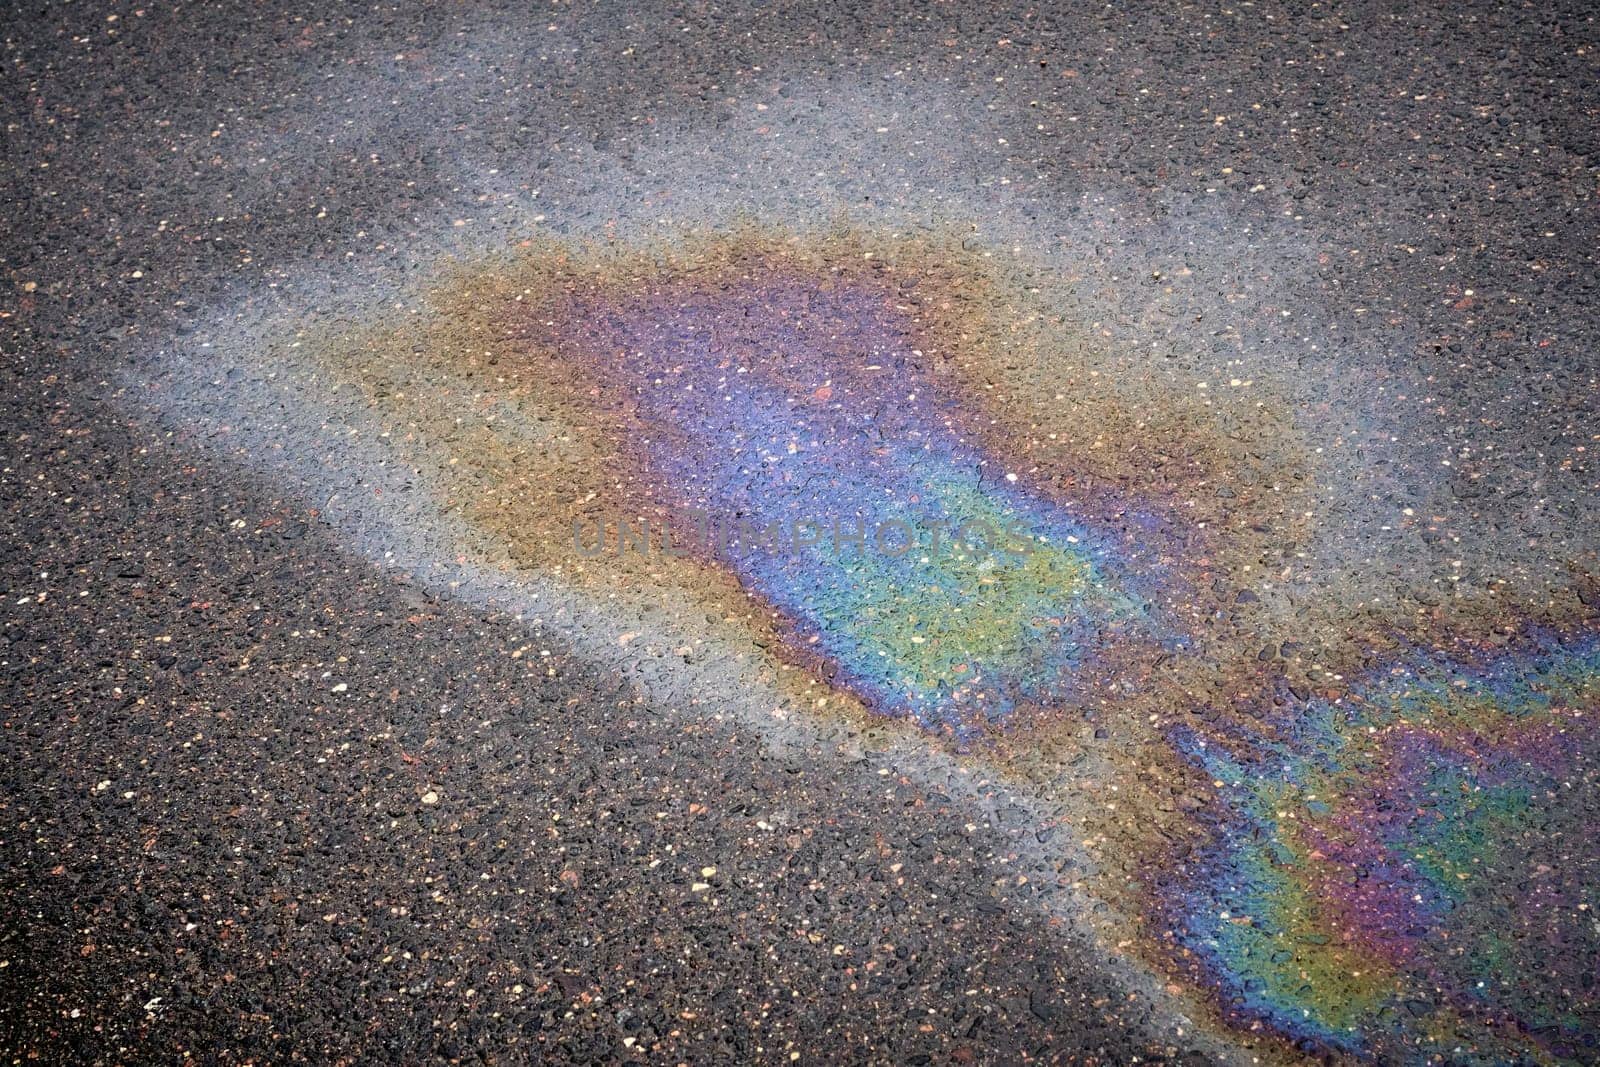 Fuel or oil stain with texture on wet asphalt under rainy conditions, symbolizing environmental pollution